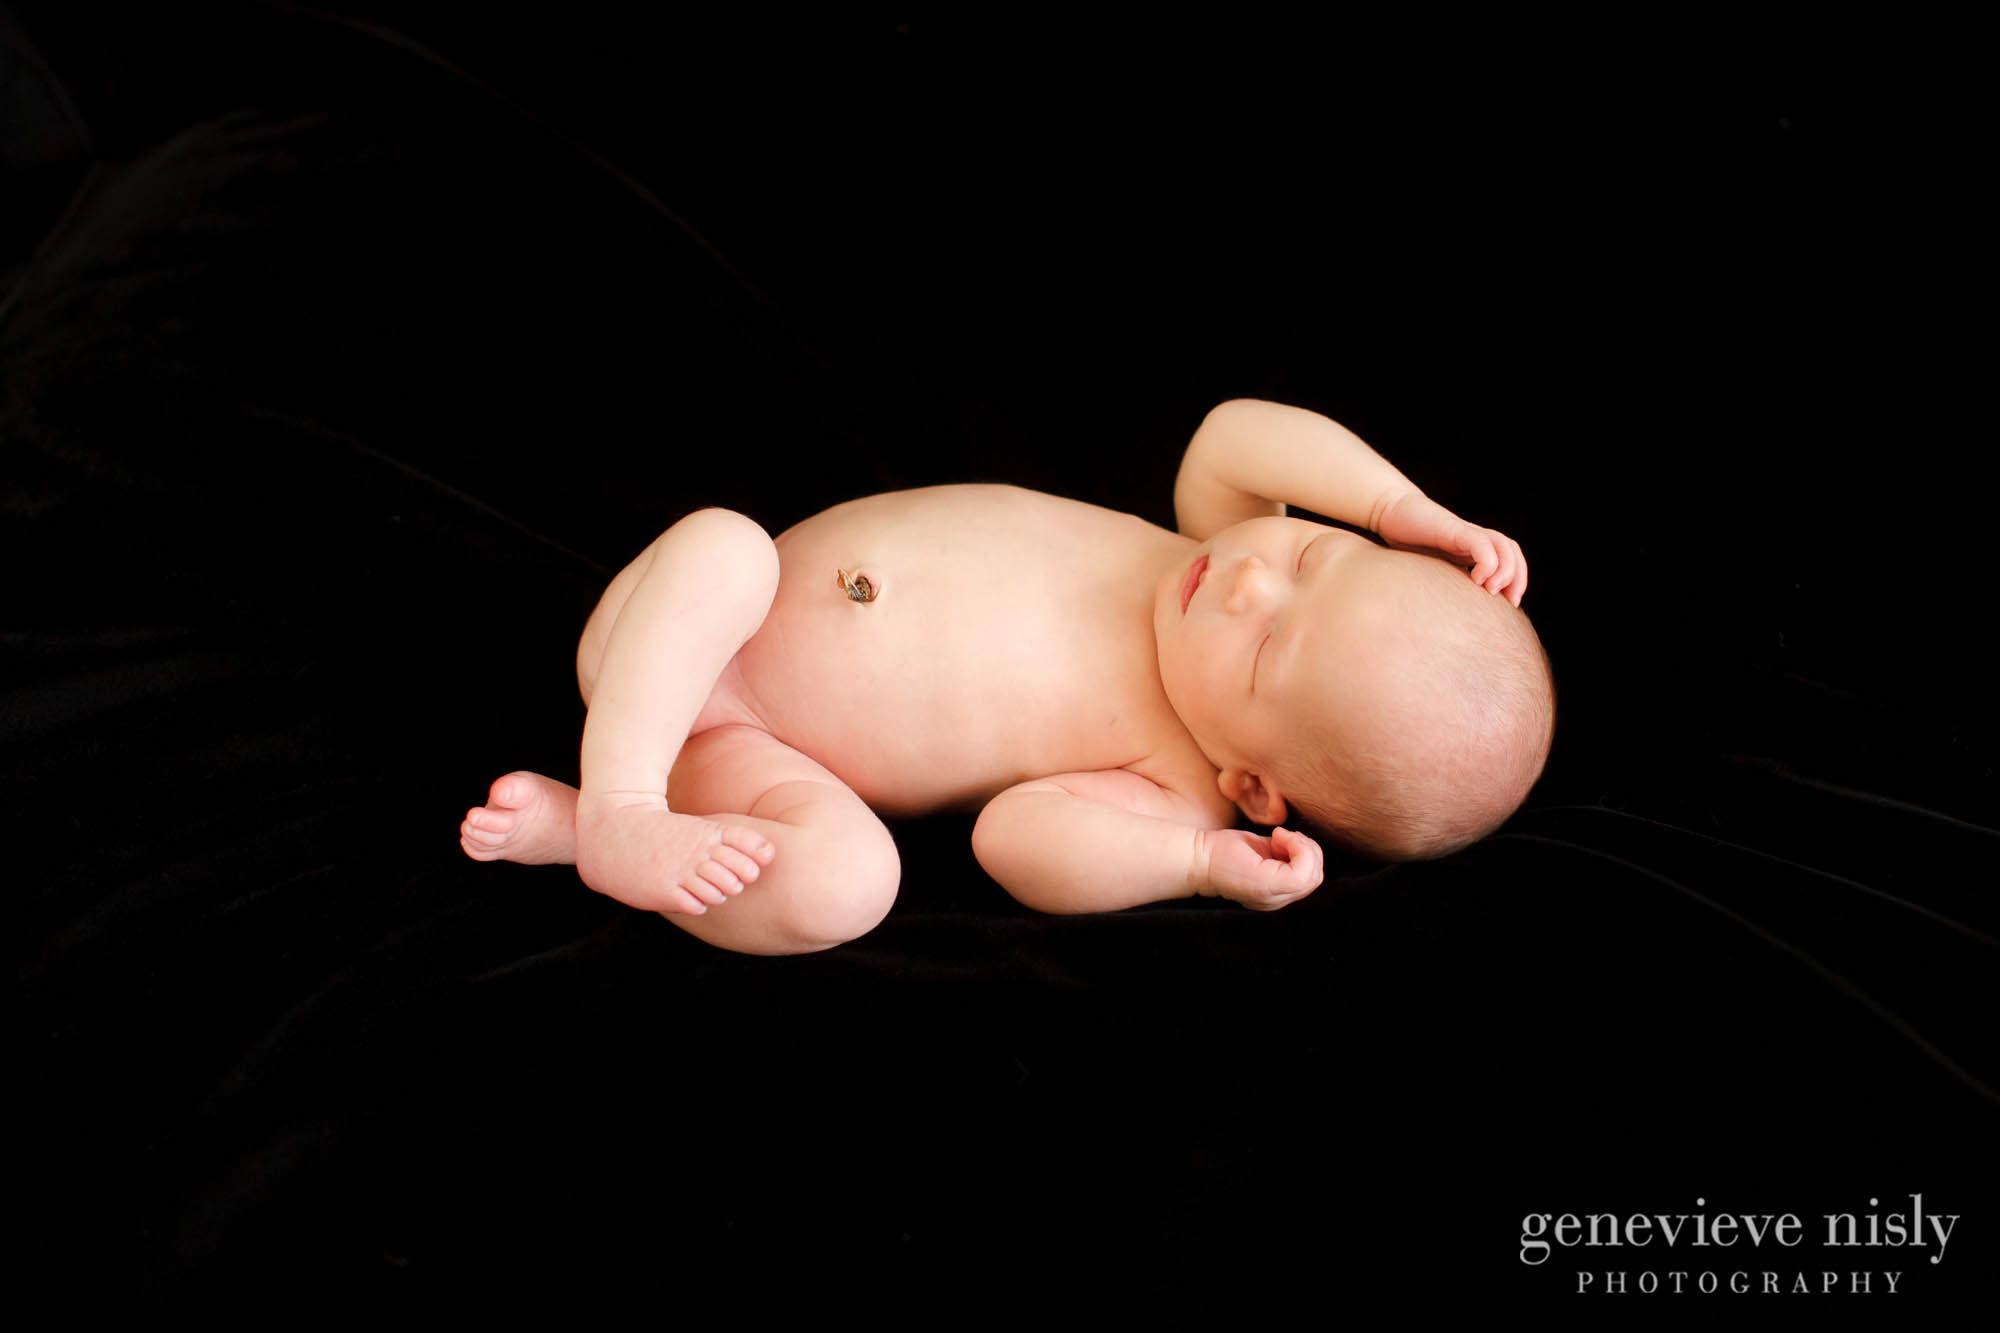  Baby, Copyright Genevieve Nisly Photography, Portraits